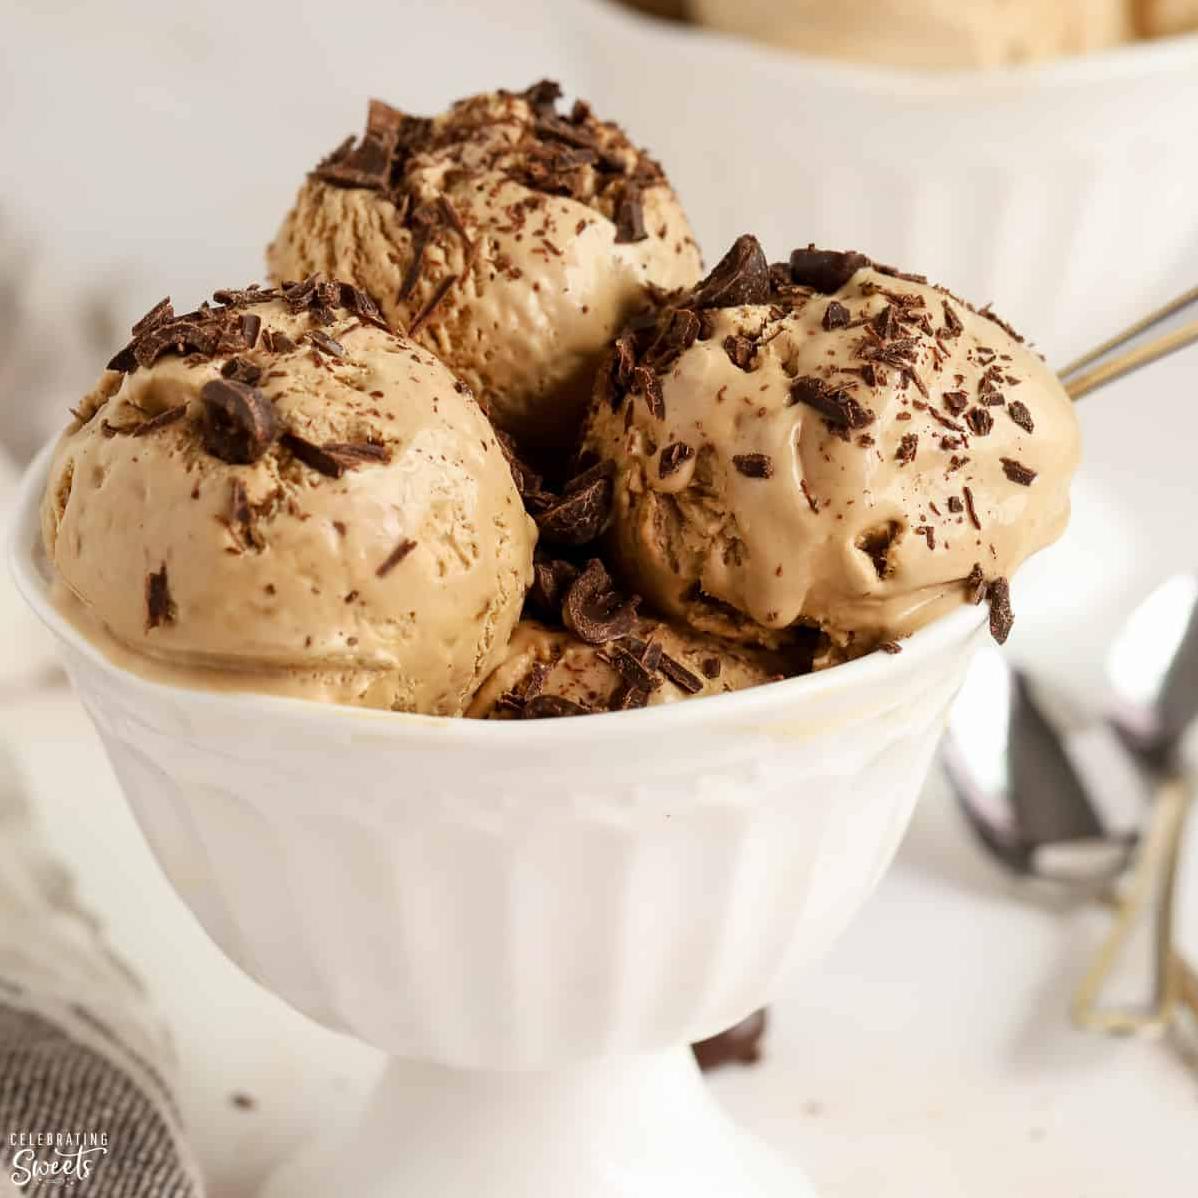  Impress your friends and family with your homemade coffee ice cream skills.